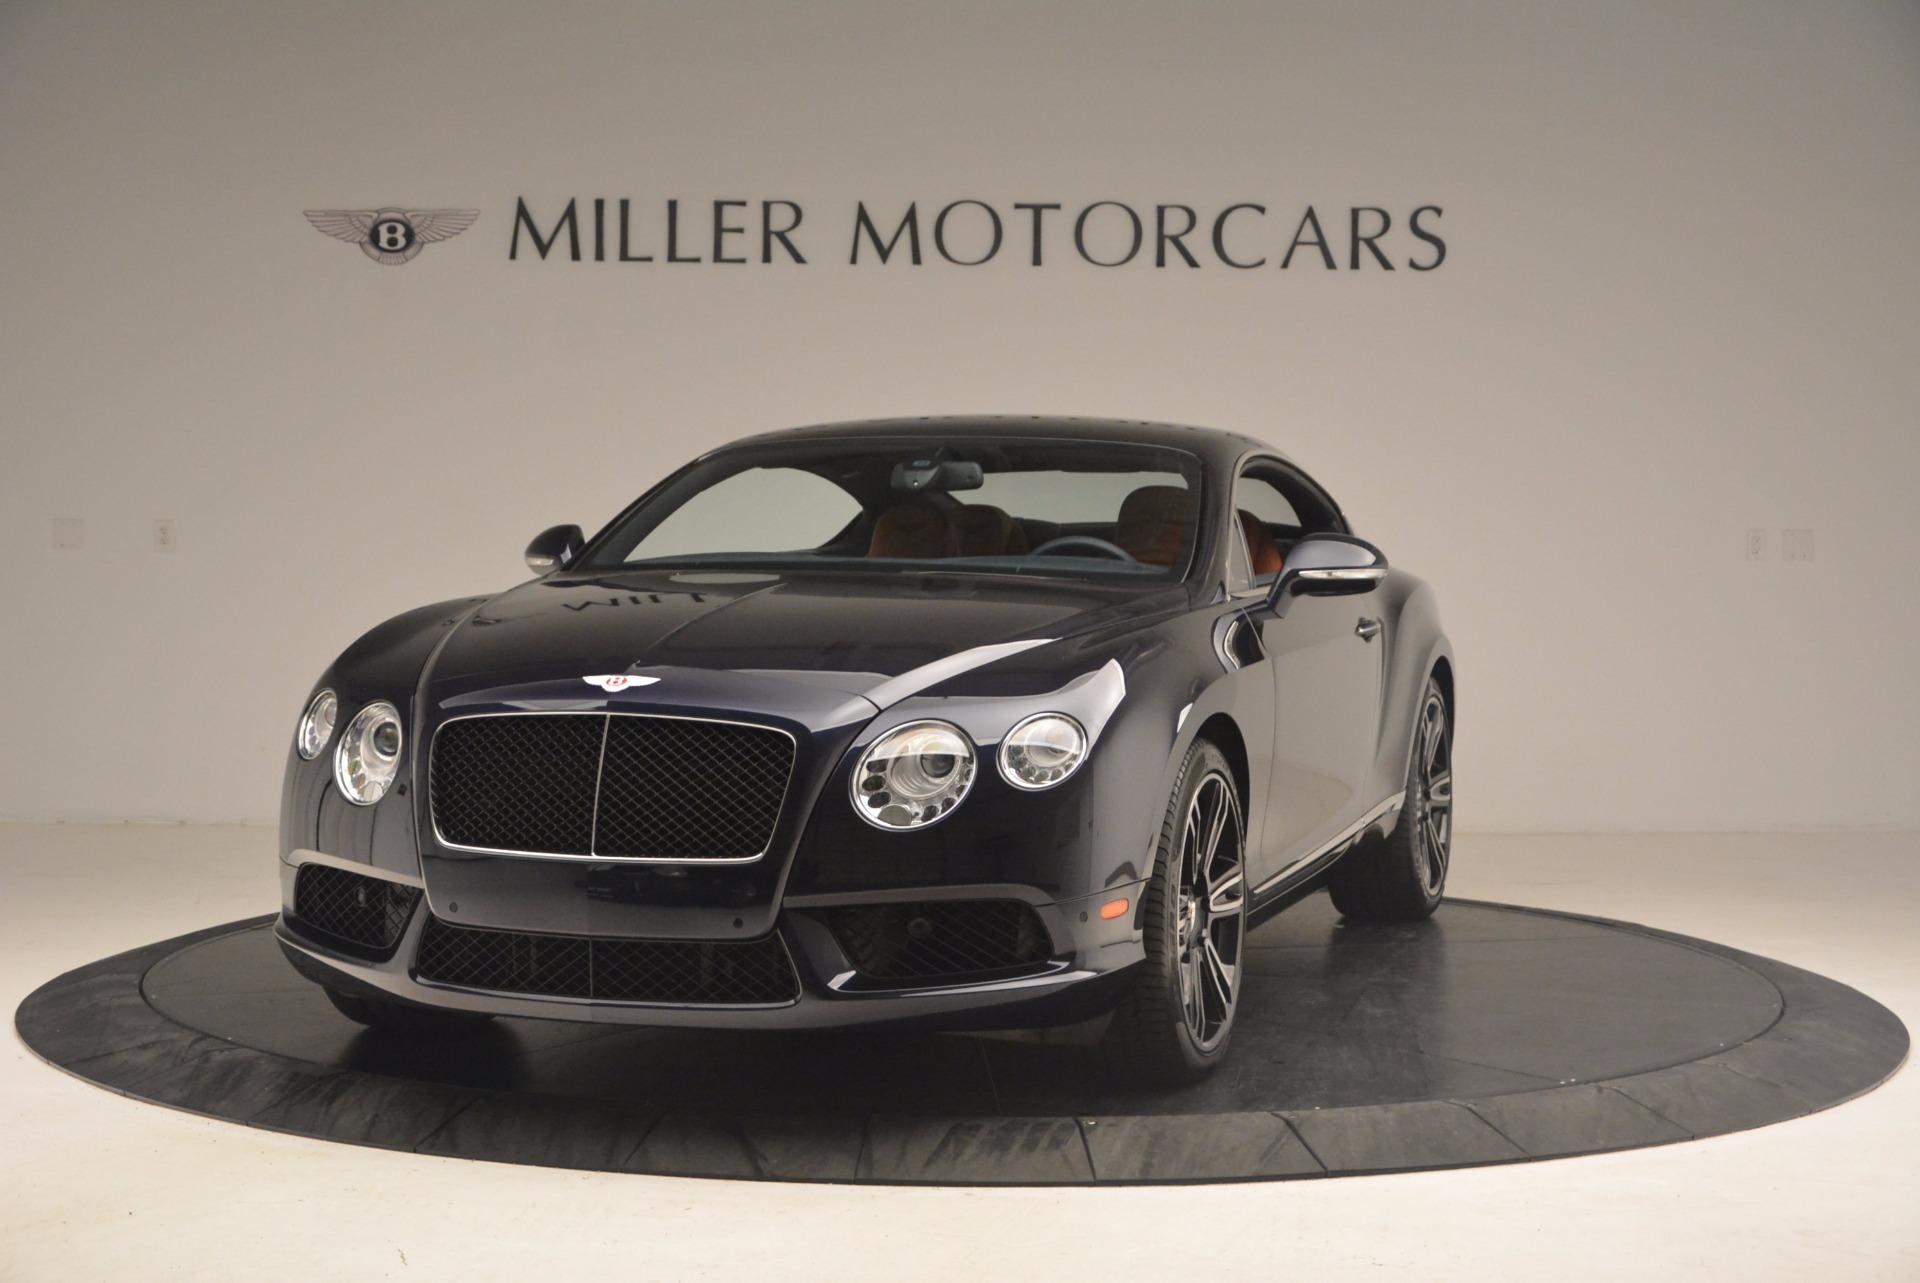 Pre Owned 14 Bentley Continental Gt V8 For Sale Special Pricing Bentley Greenwich Stock 7213